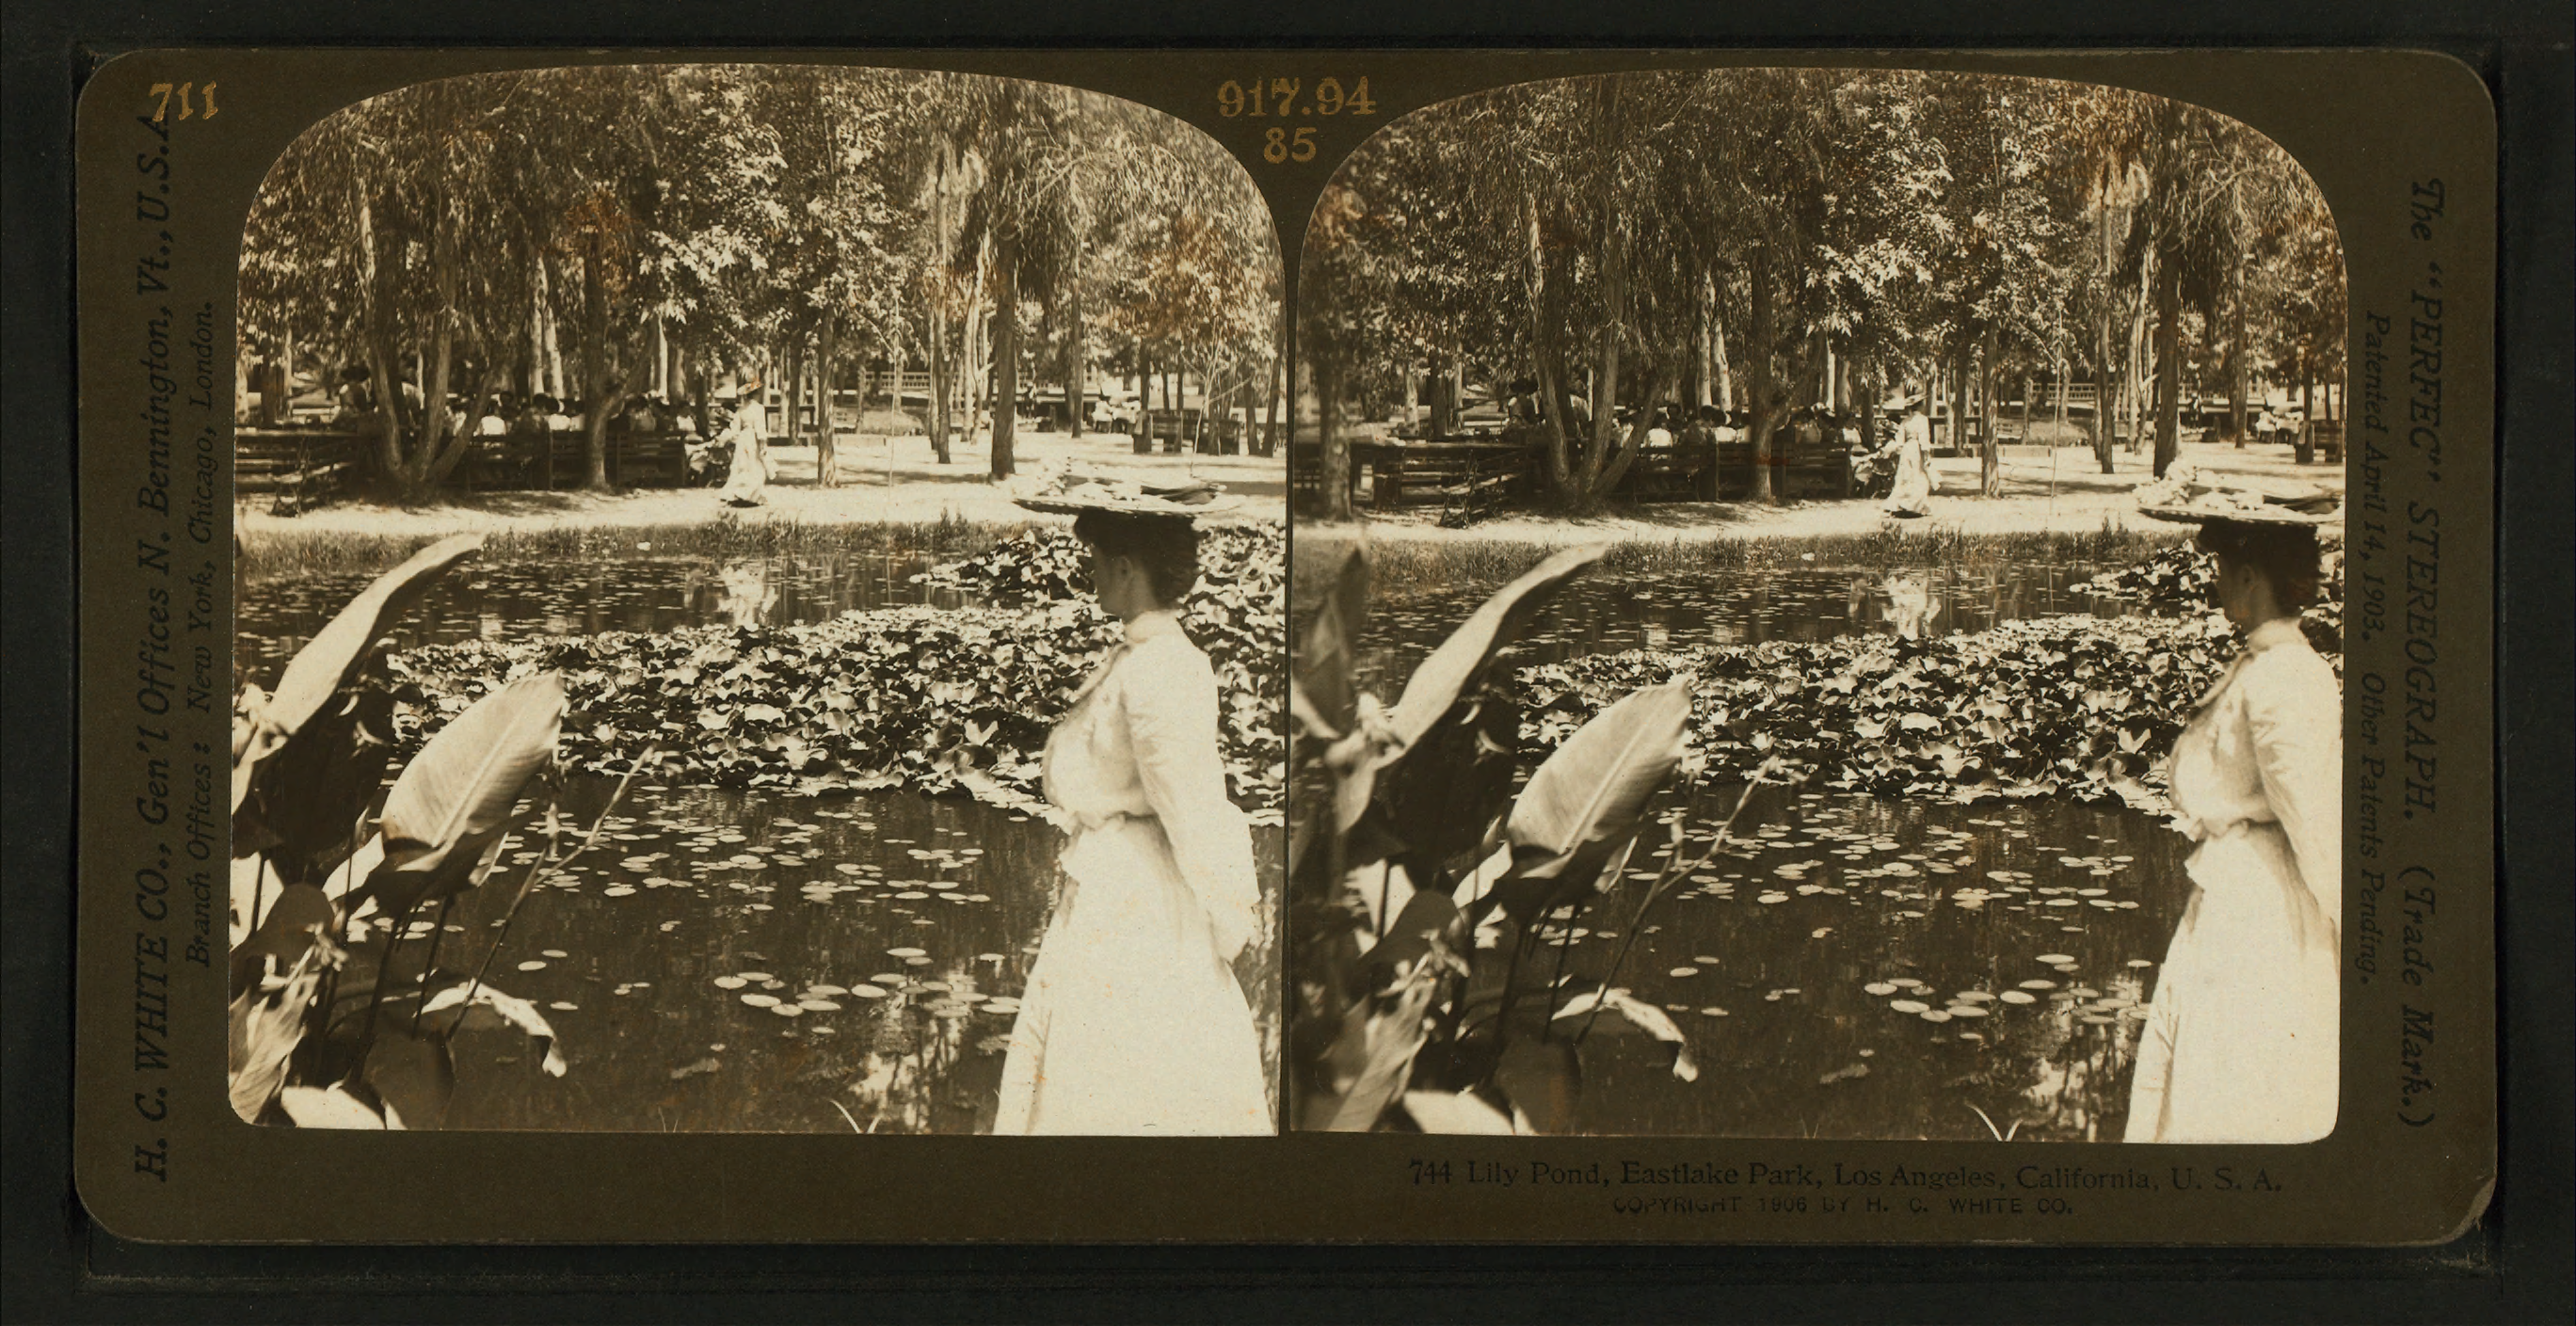 Lily Pond, Eastlake Park, Los Angeles, California, U.S.A, from Robert N. Dennis collection of stereoscopic views